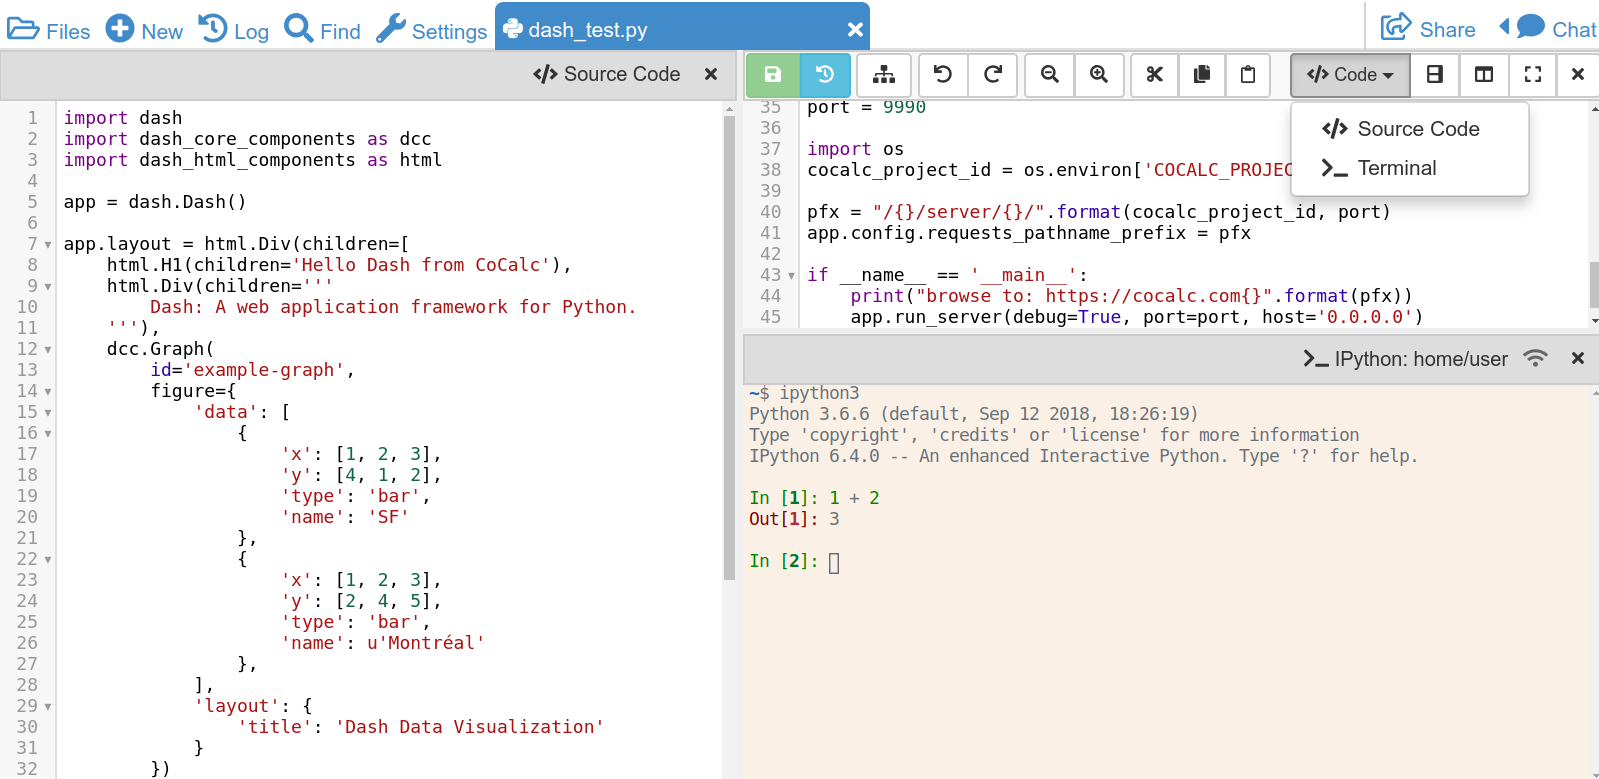 split screen with two views of source file plus terminal running ipython